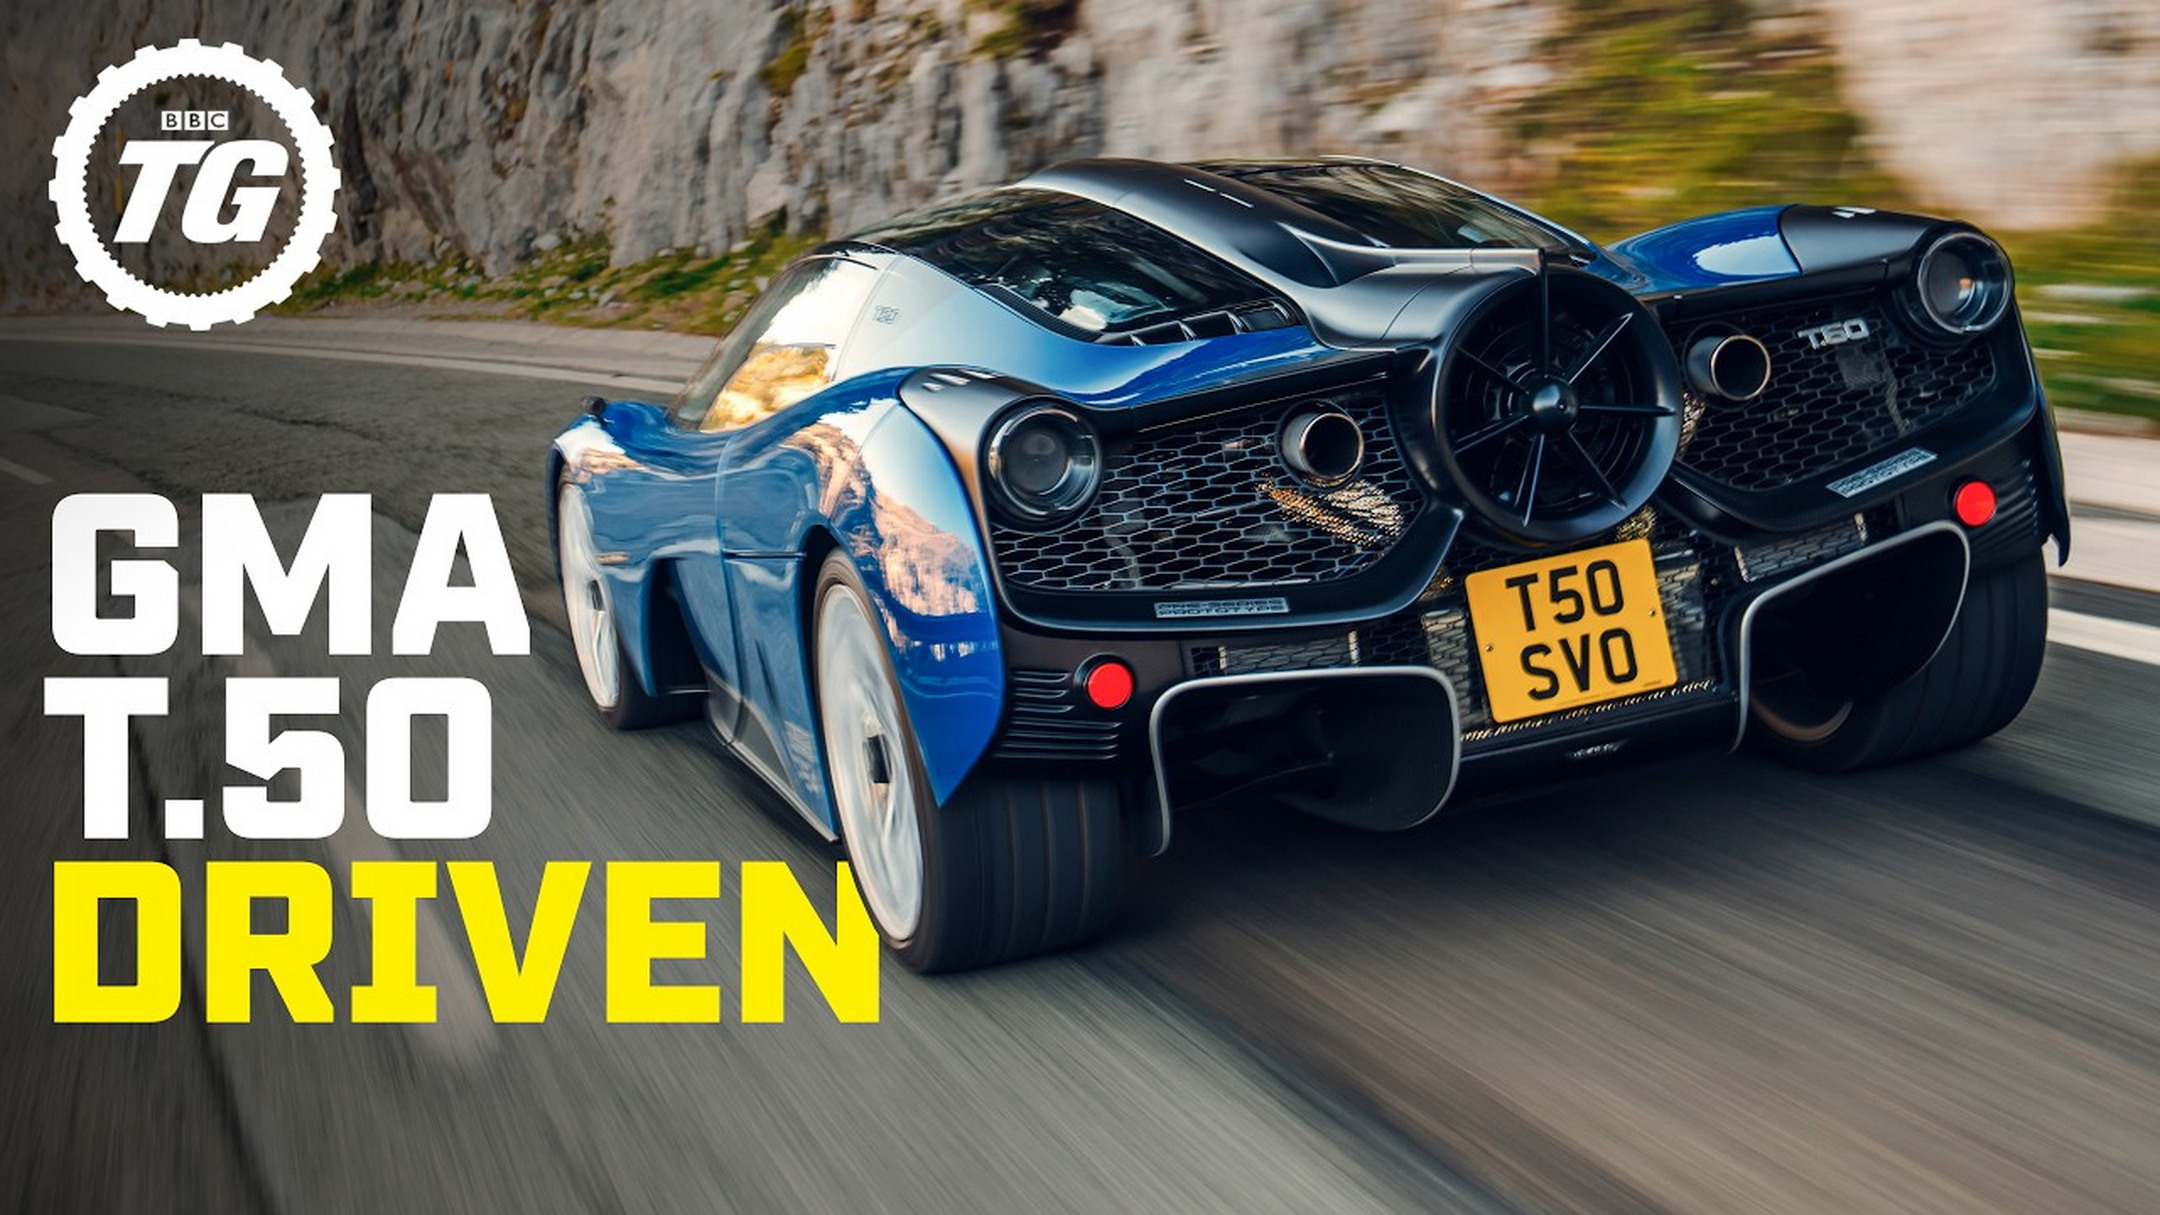 GMA T50 Supercar Gets Its First 900-Mile Test Drive At The Hands Of Top Gear